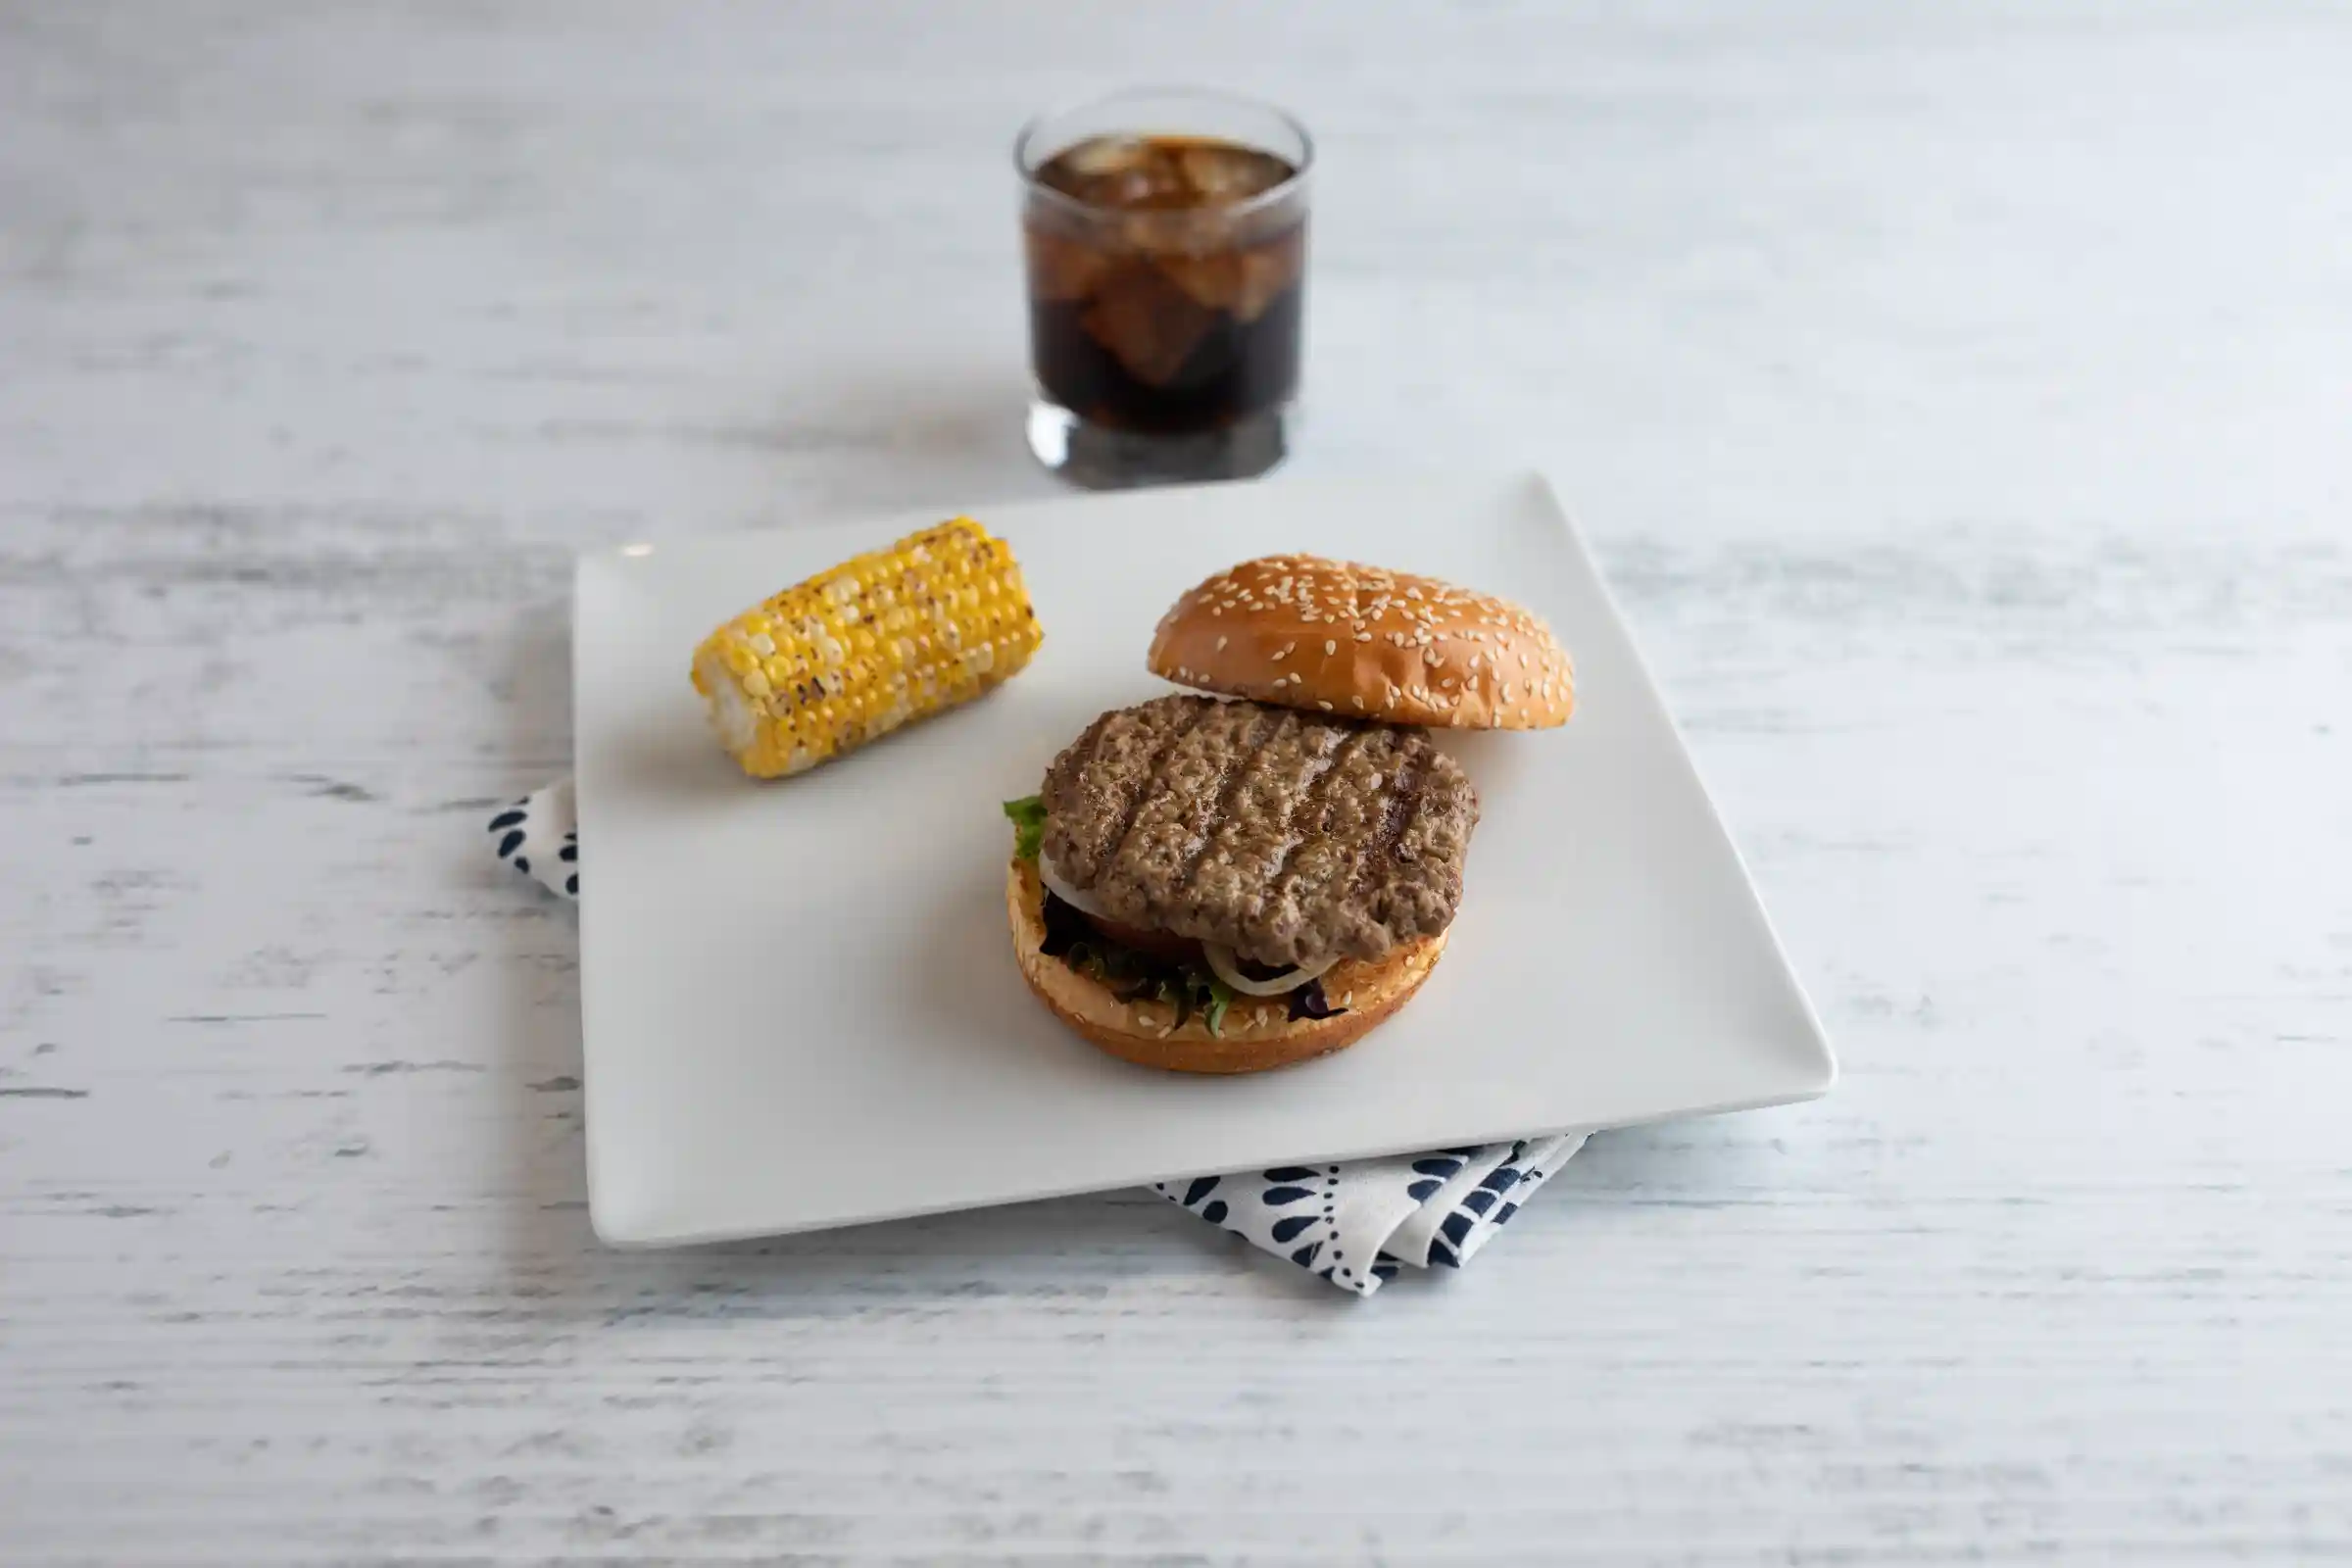 AdvancePierre™ Fully Cooked Gluten Free Flame Grilled Beef Burger, 2 oz.https://images.salsify.com/image/upload/s--ifQ_R_TZ--/q_25/o6l3ioivkzcvbppur3oy.webp